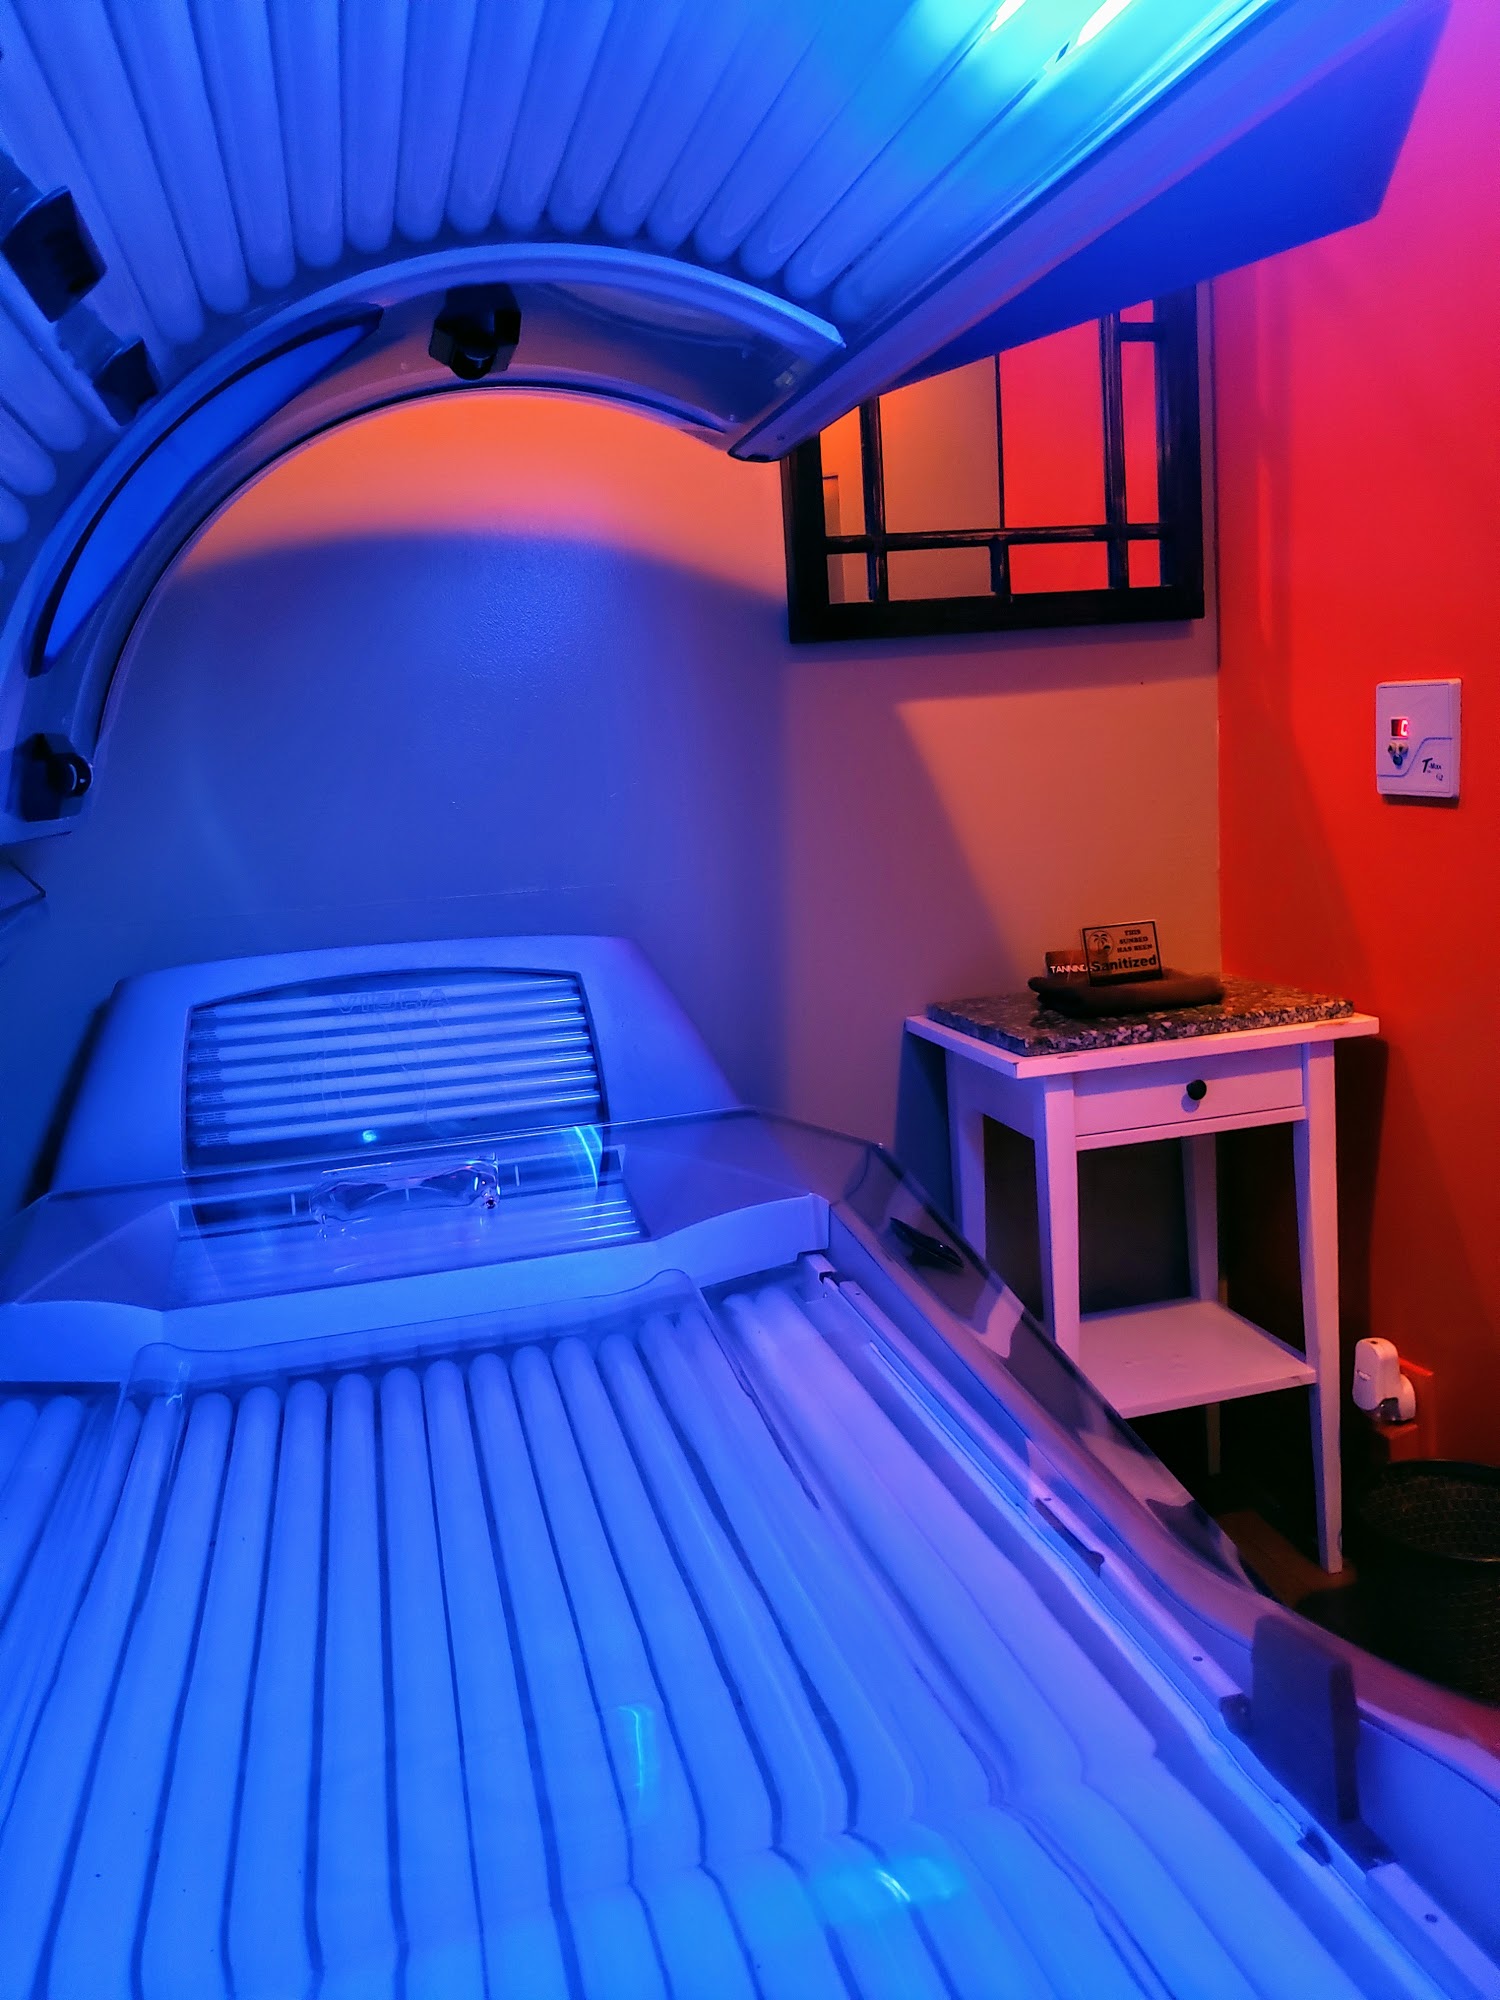 Tanning Spa Nyc